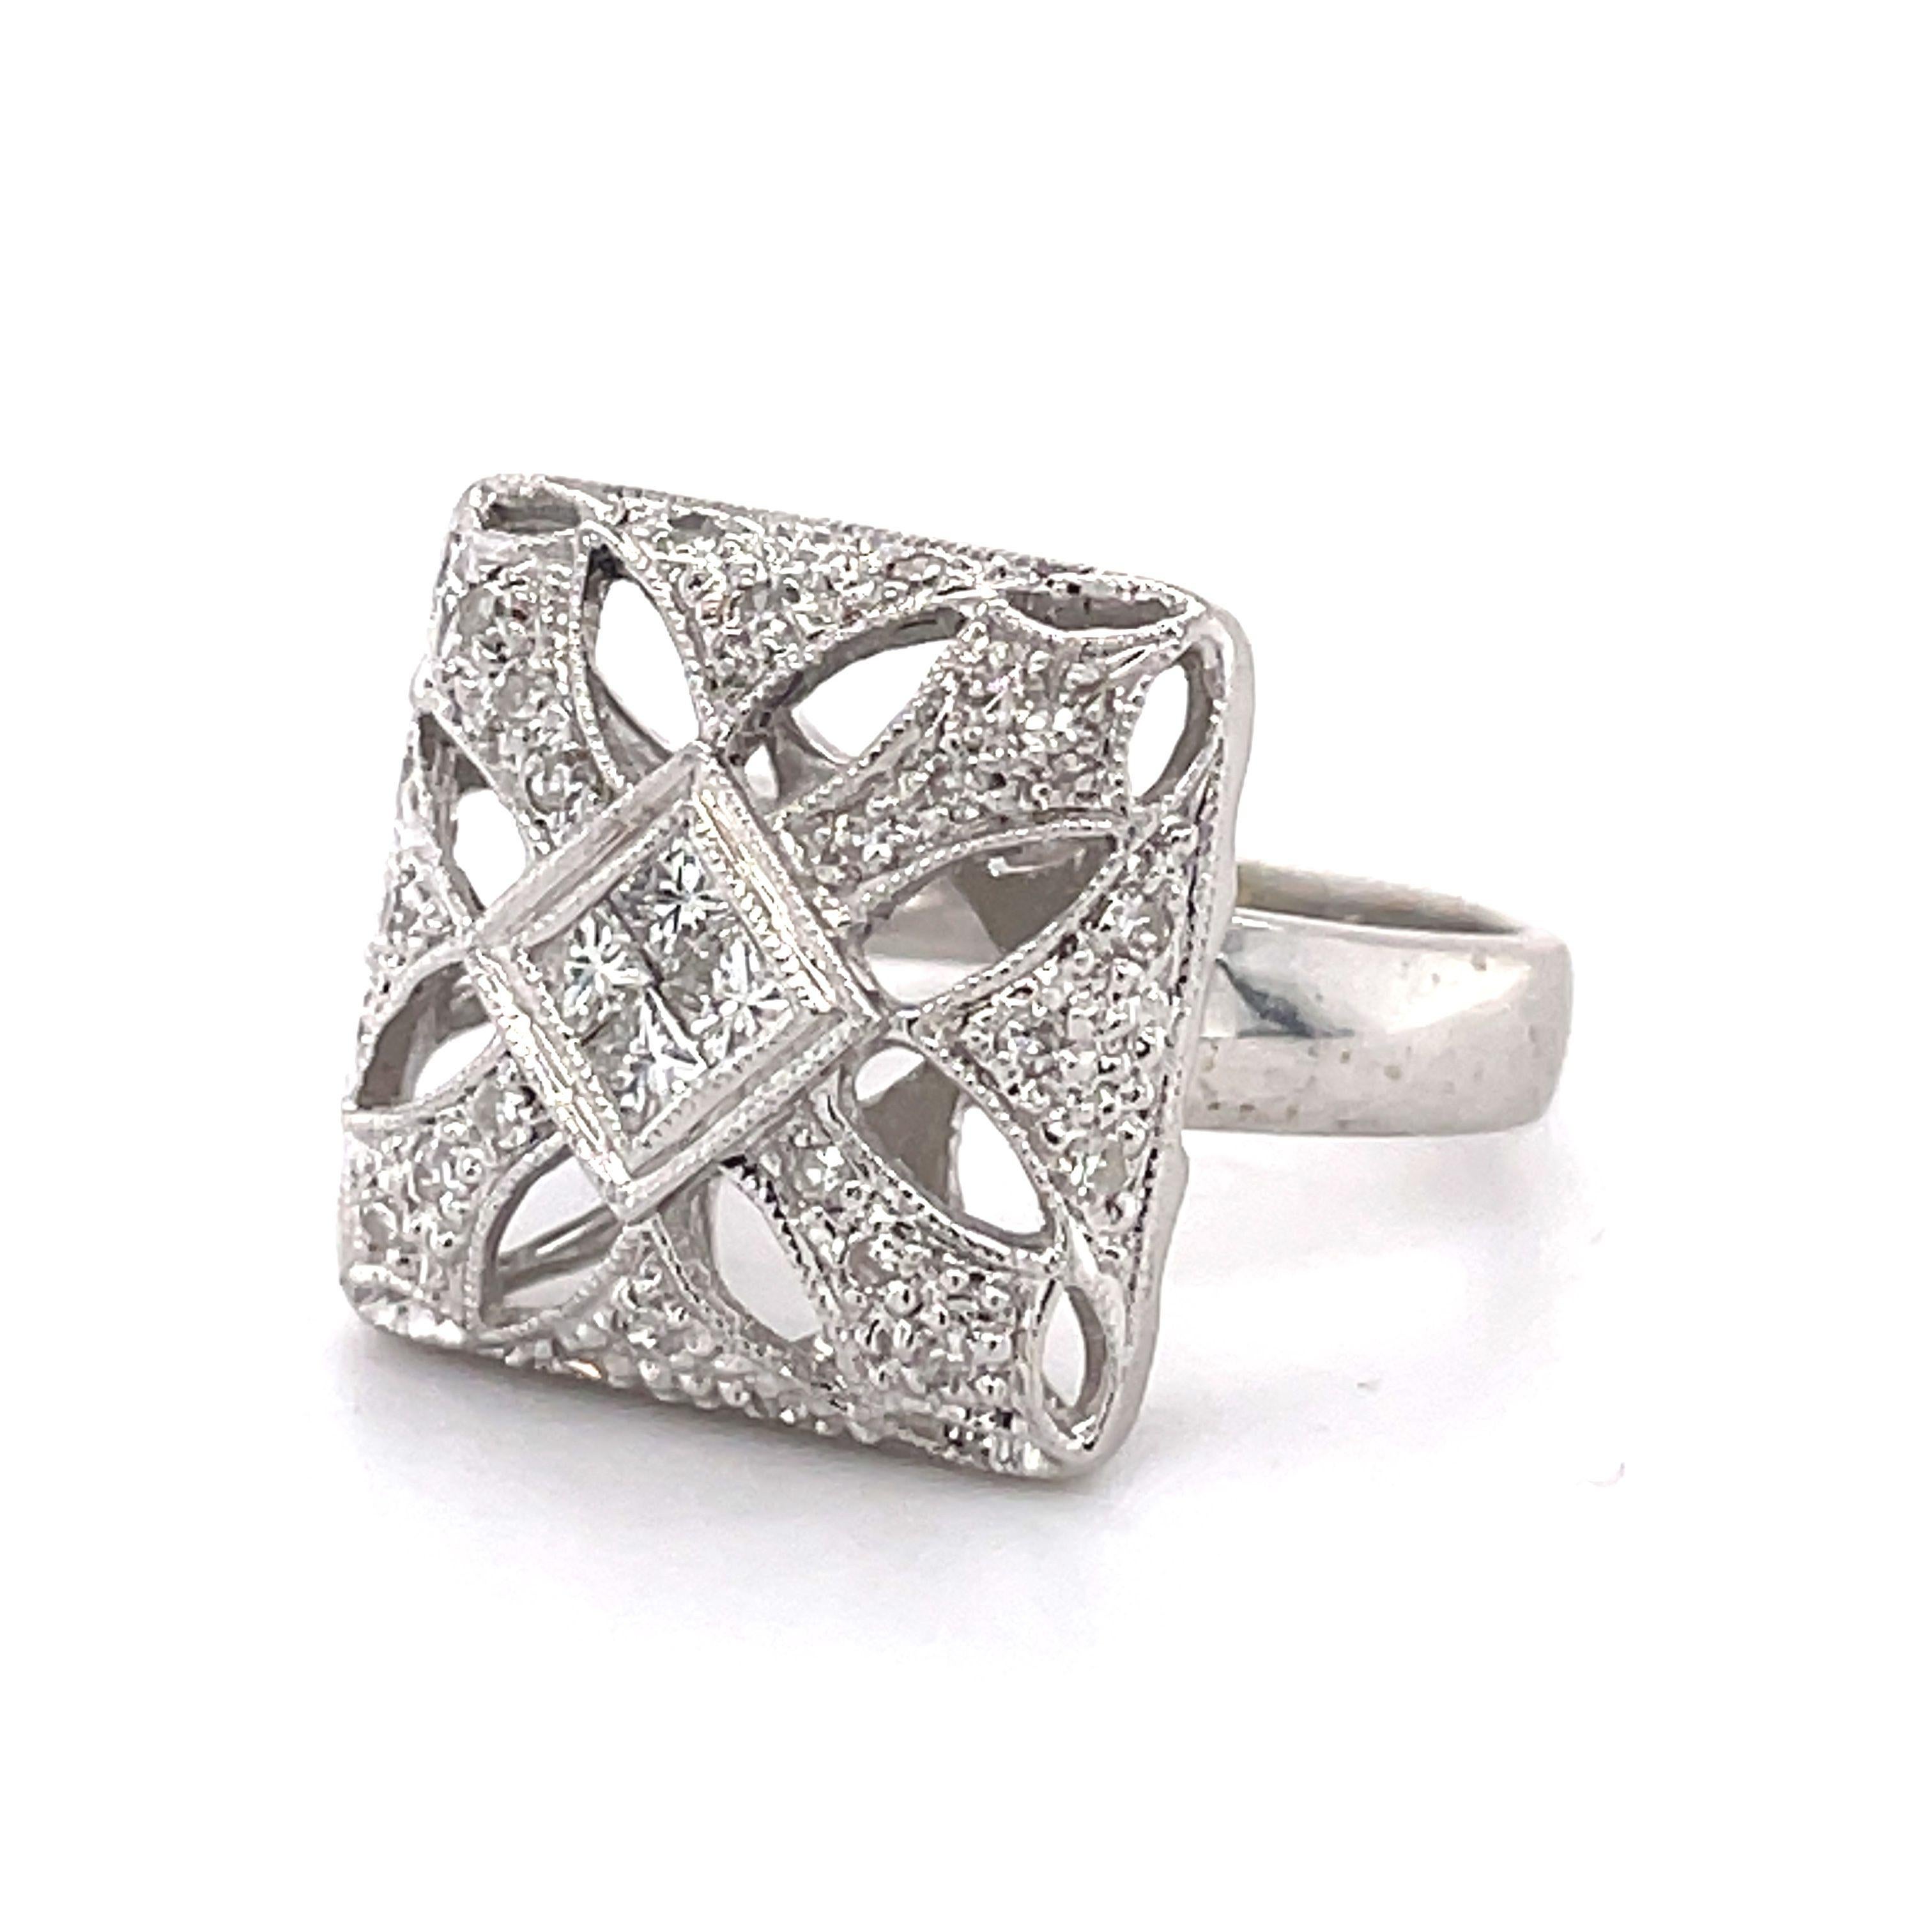 Art Deco Mosaic Style Cocktail Ring - 14K White Gold, 0.78ct Netural Diaonds For Sale 4